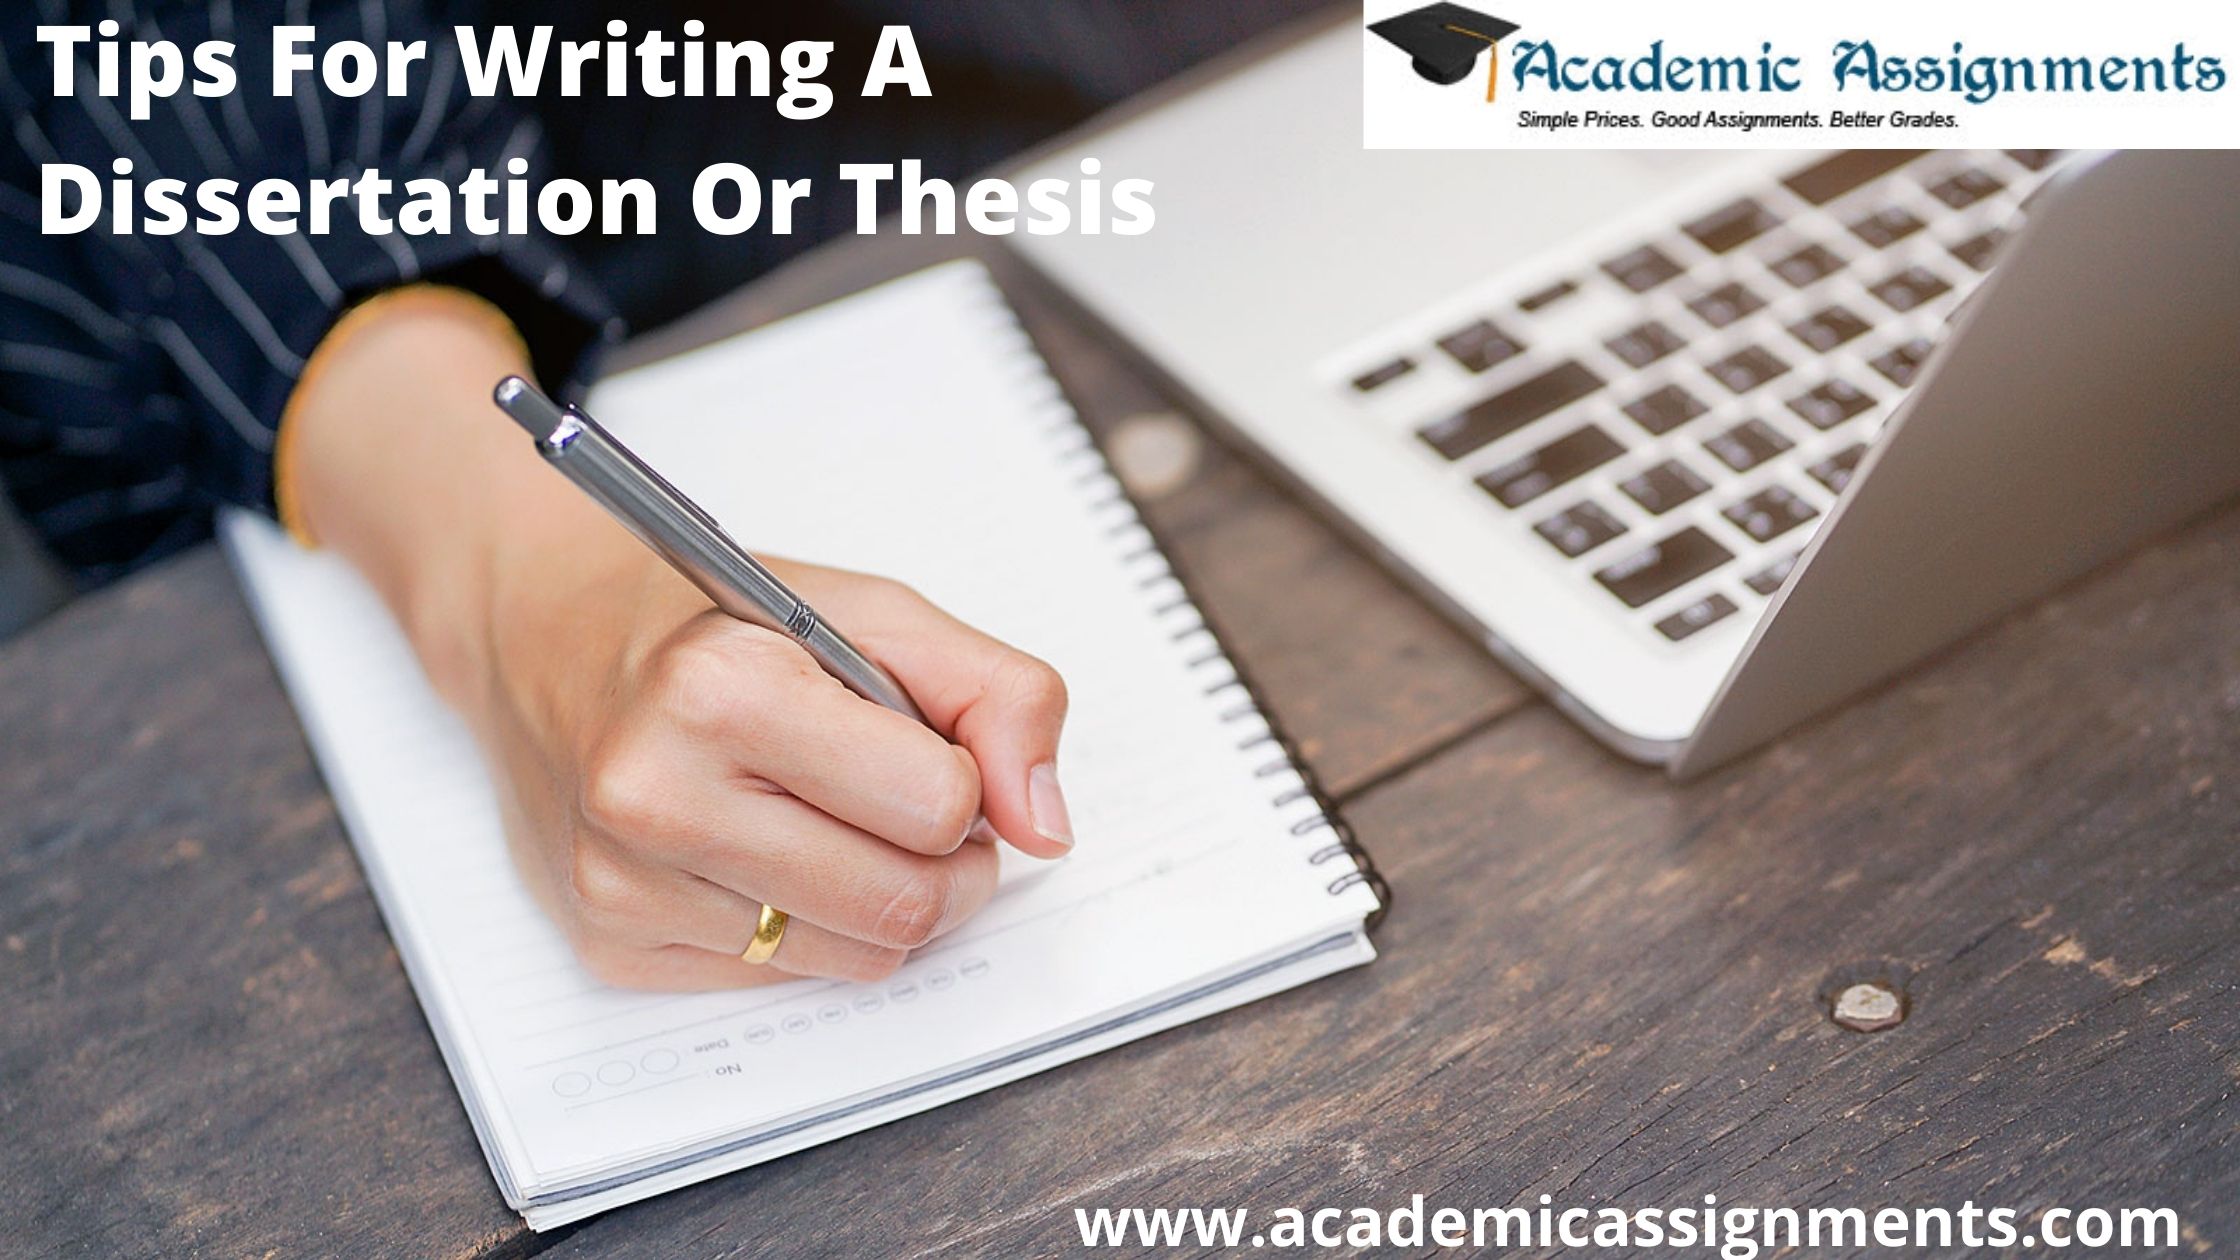 Tips For Writing A Dissertation Or Thesis